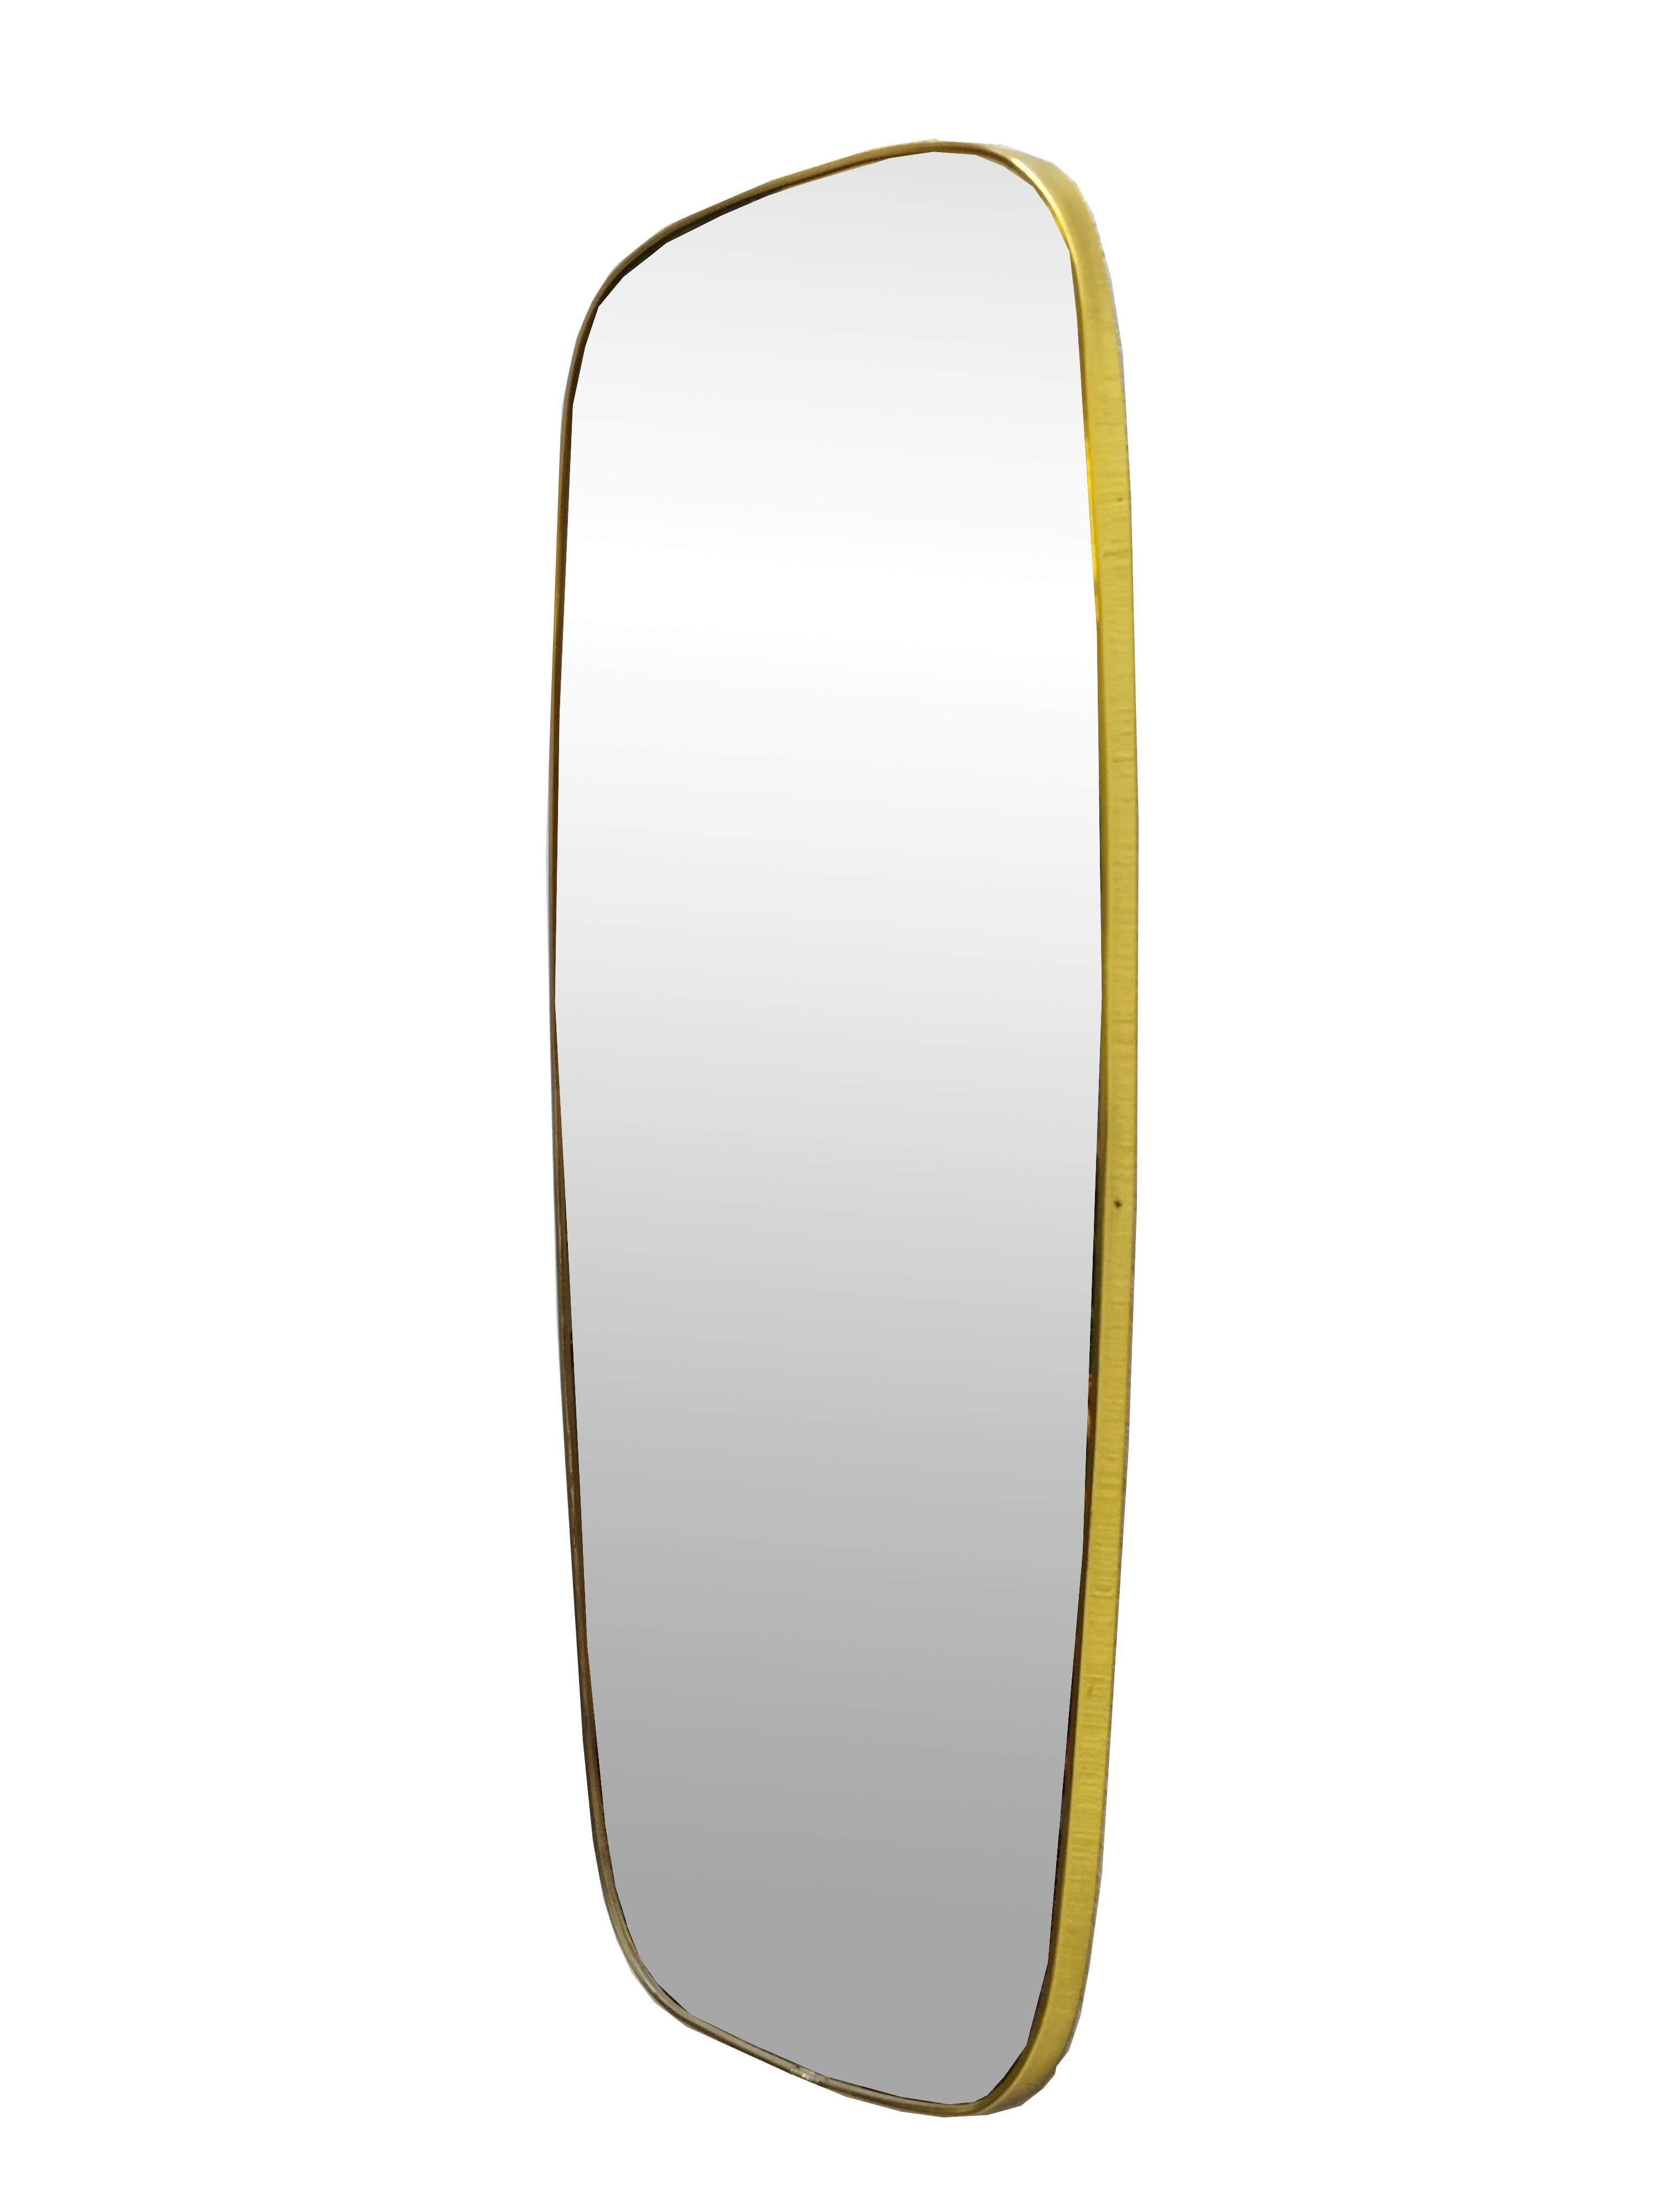 Large wall mirror, Italian production from the 1960s, with rounded shapes and a golden aluminum frame